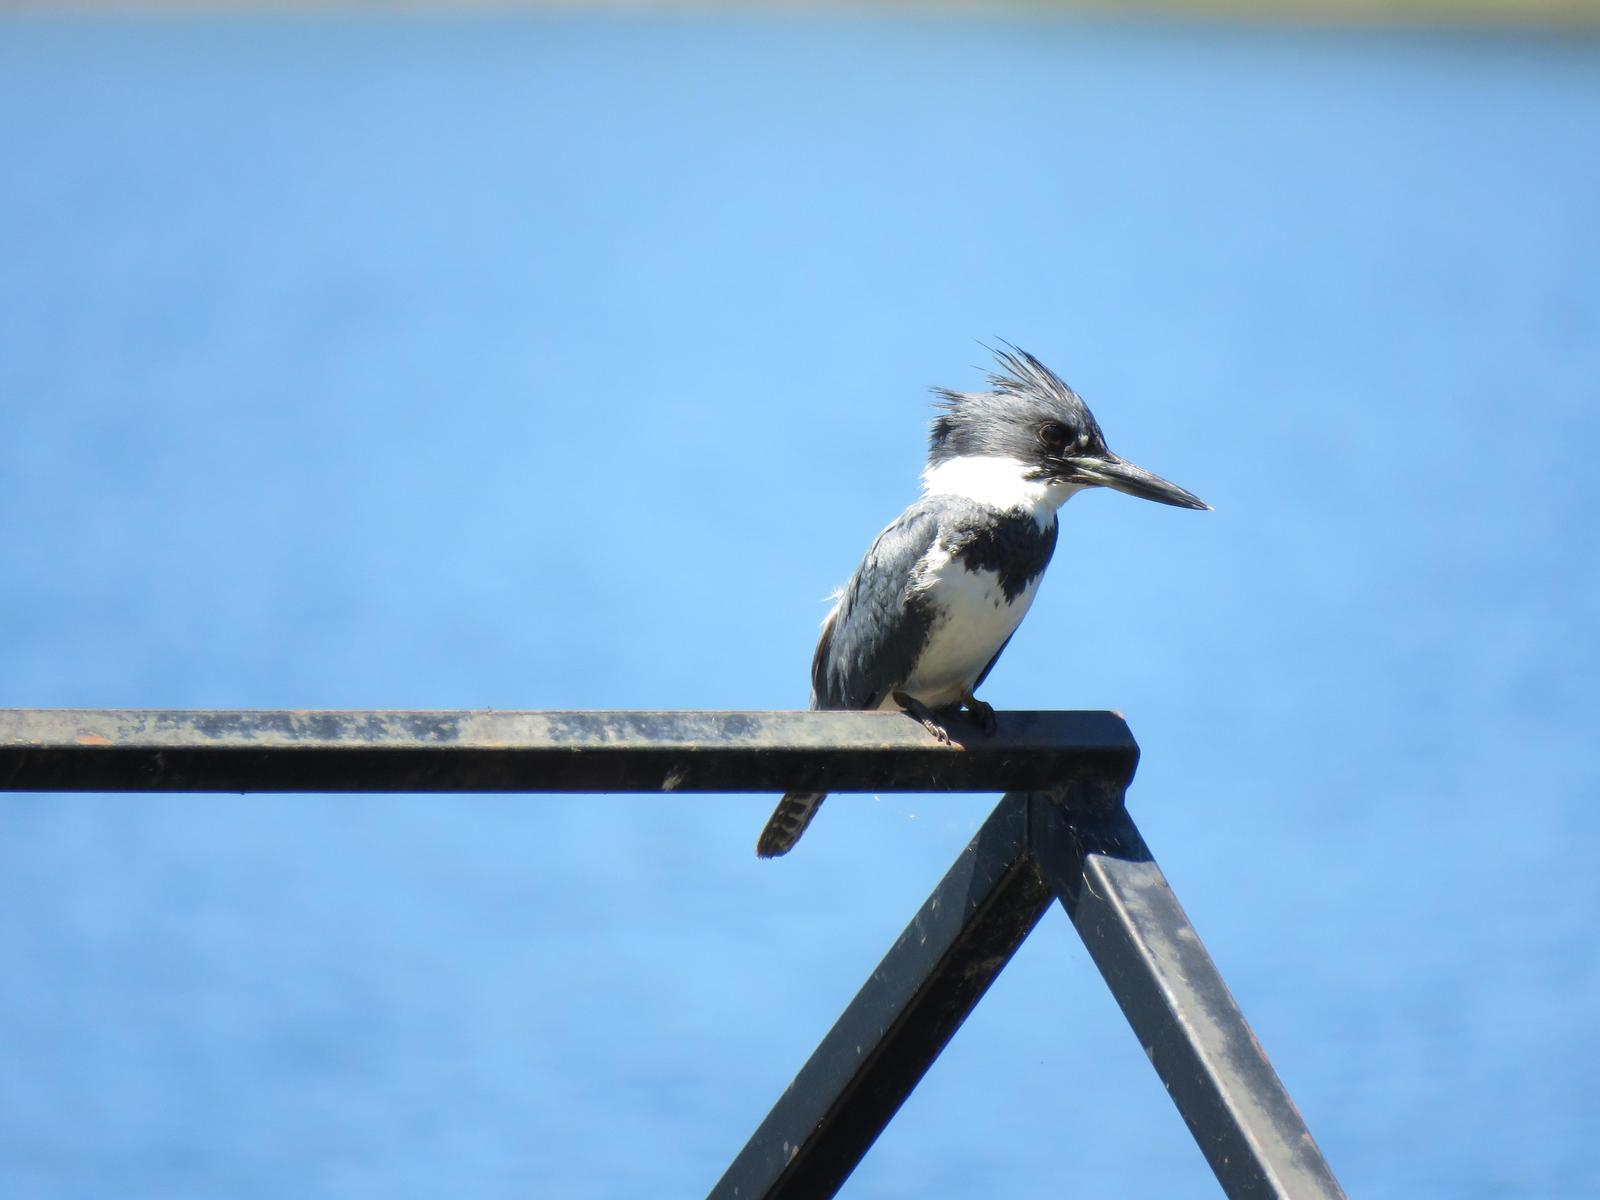 Belted Kingfisher Photo by Nolan Keyes